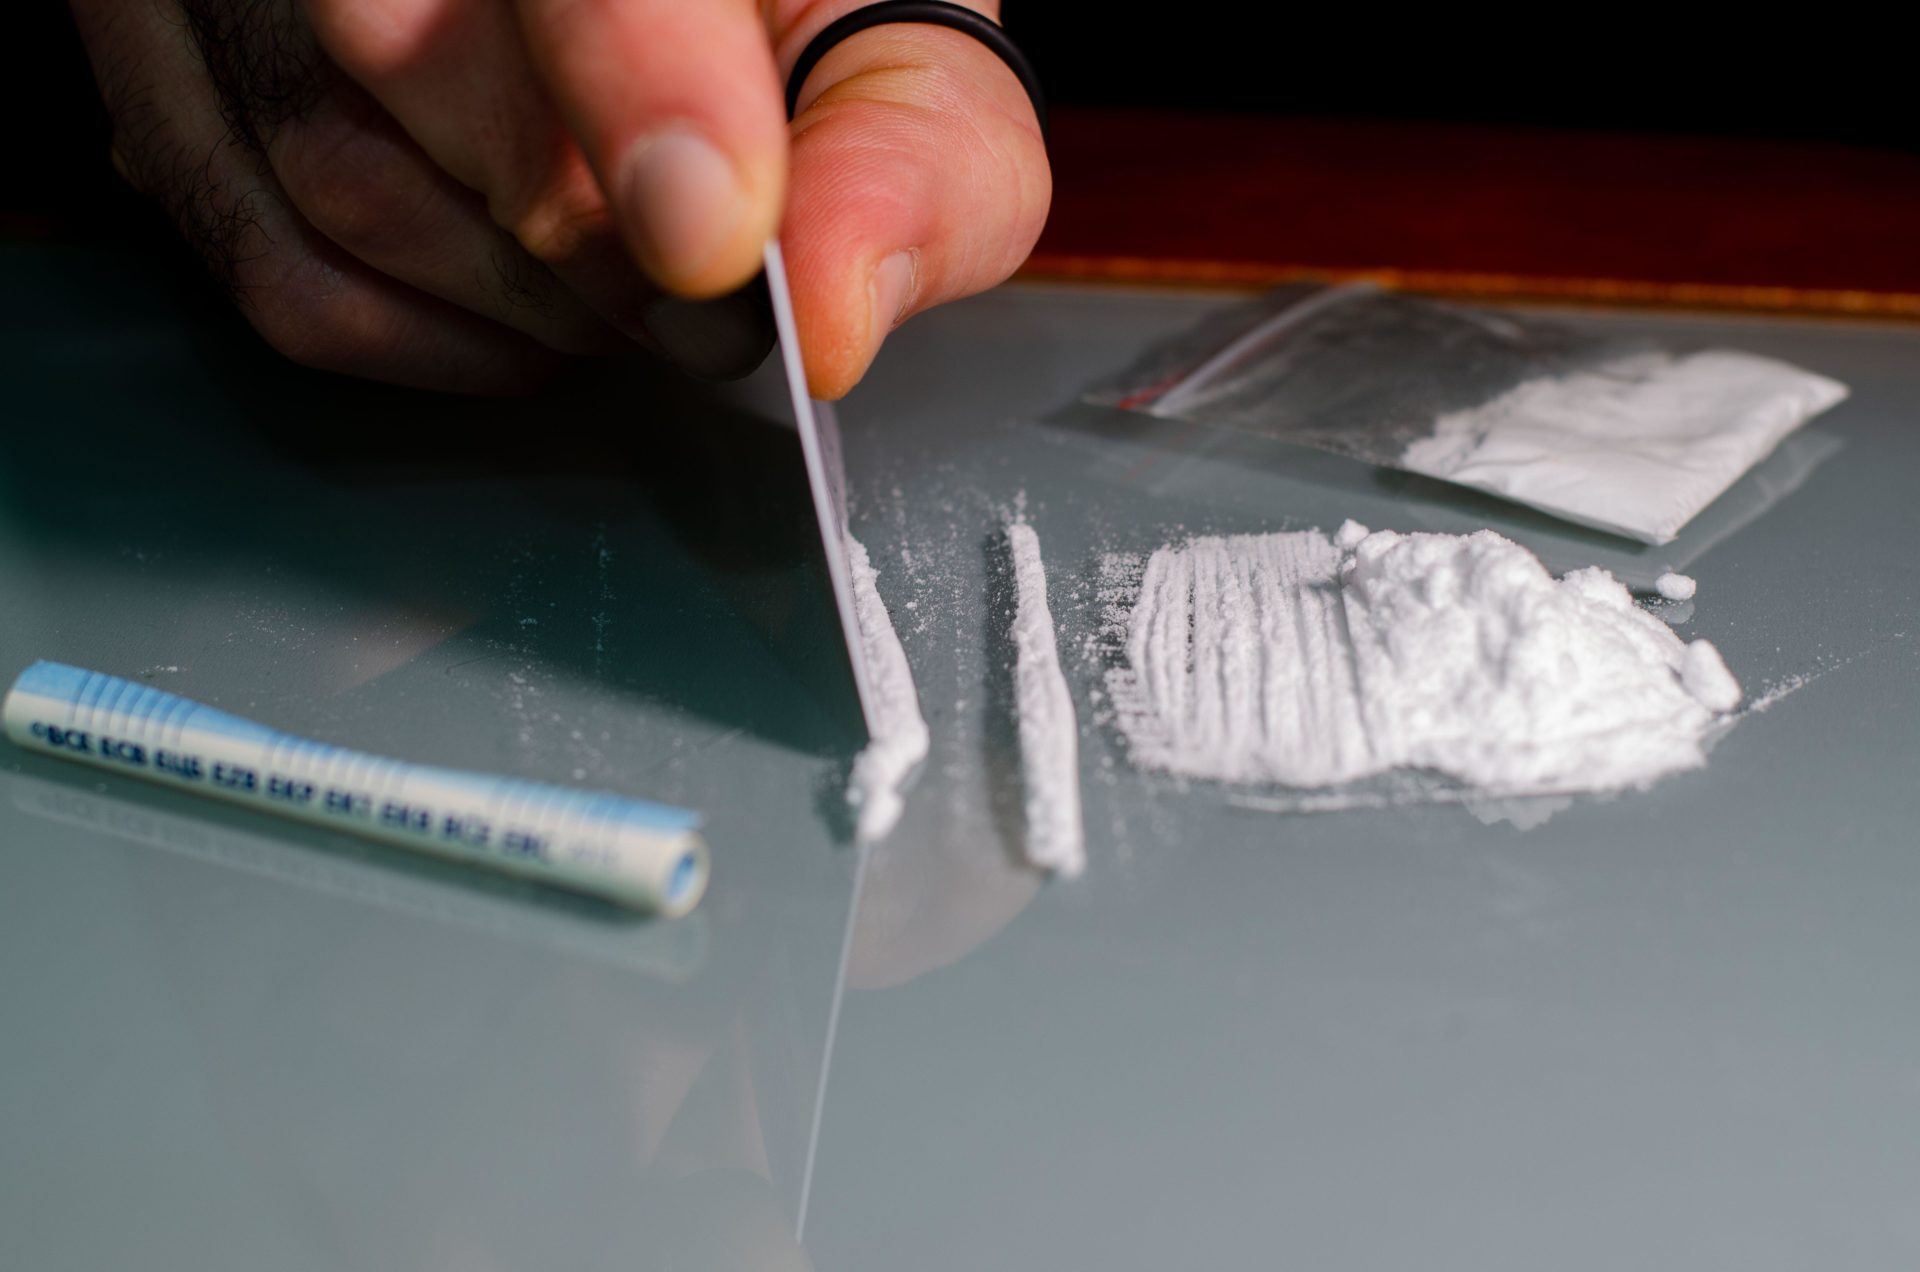 A man divides the cocaine into strips and then snorts.